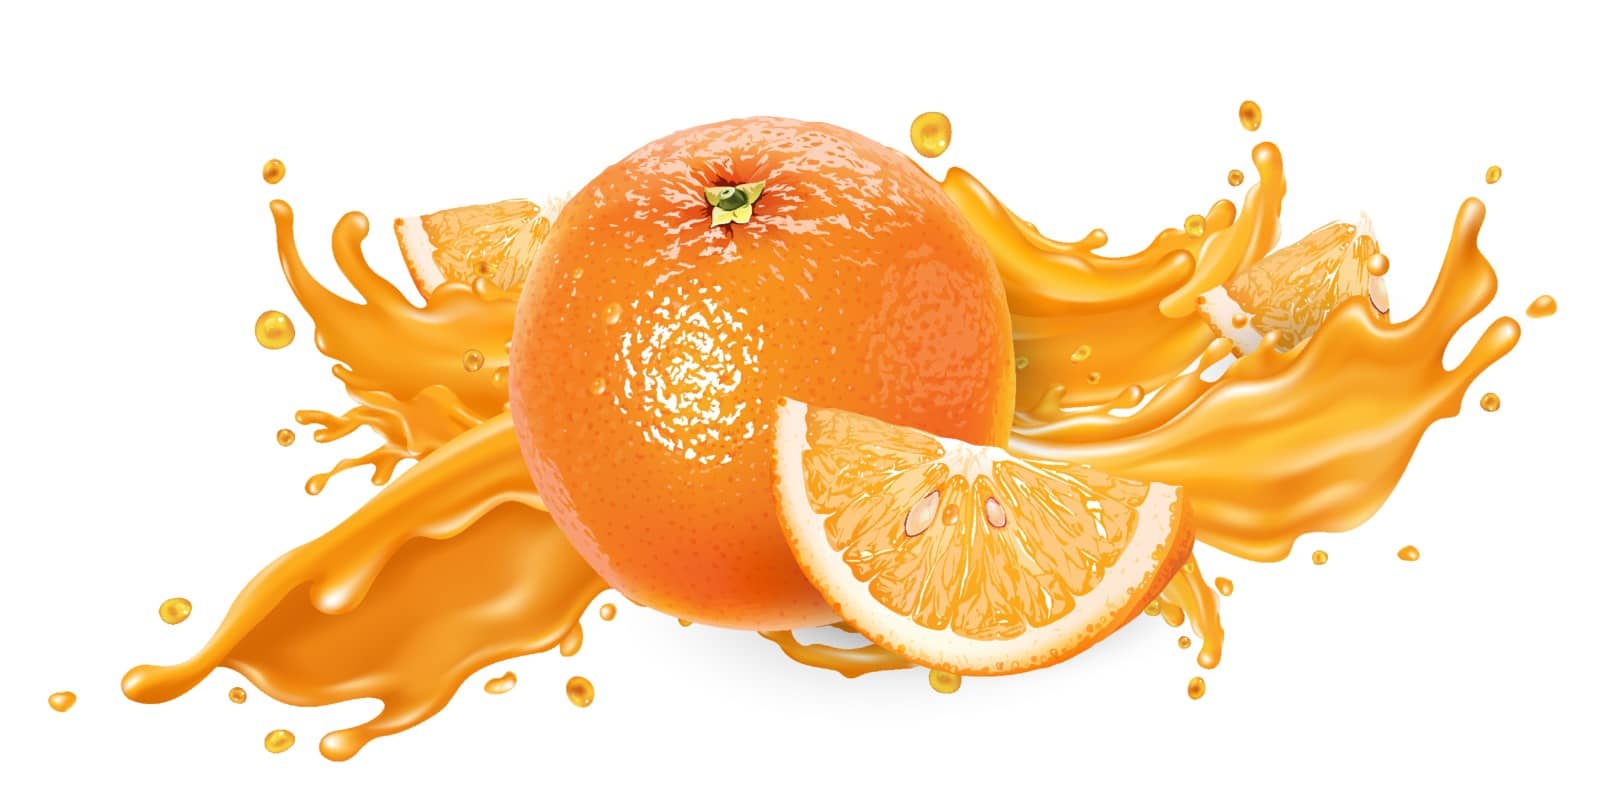 Orange whole and slices and a splash of fruit juice on a white background. Realistic vector illustration.